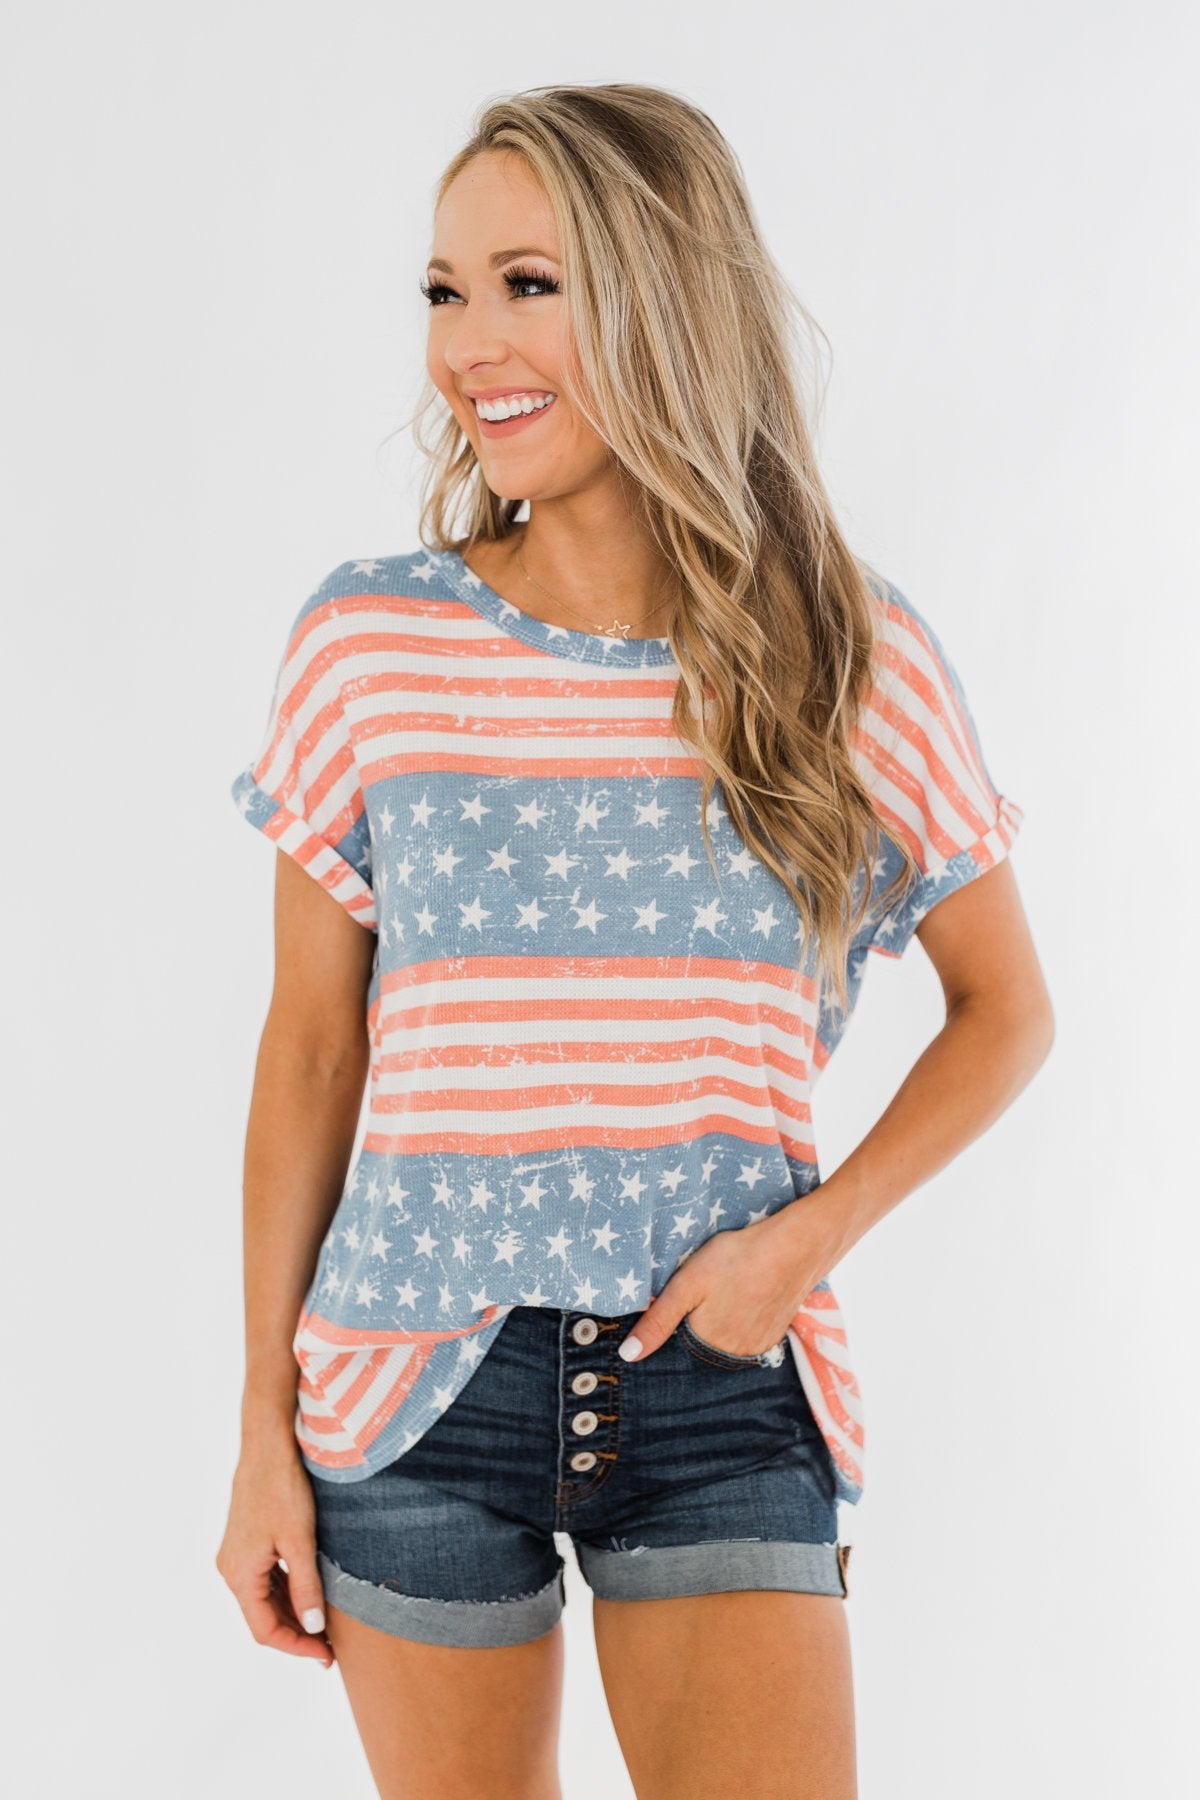 Show Your Spirit Printed Top- Americana – The Pulse Boutique